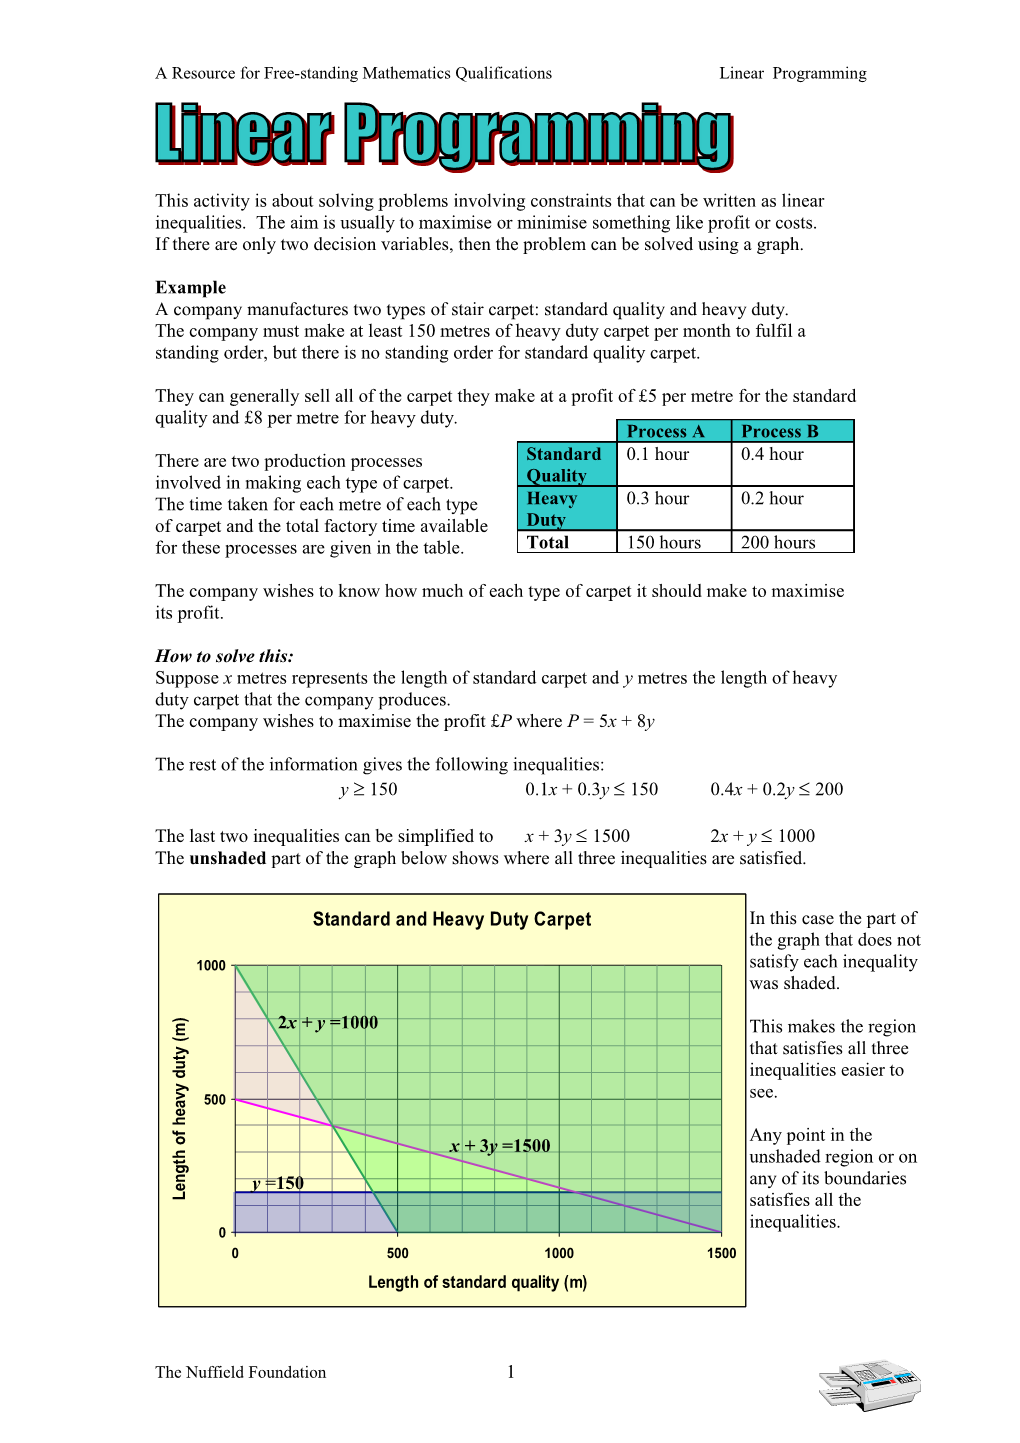 A Resource for Free-Standing Mathematics Qualifications Linear Programming